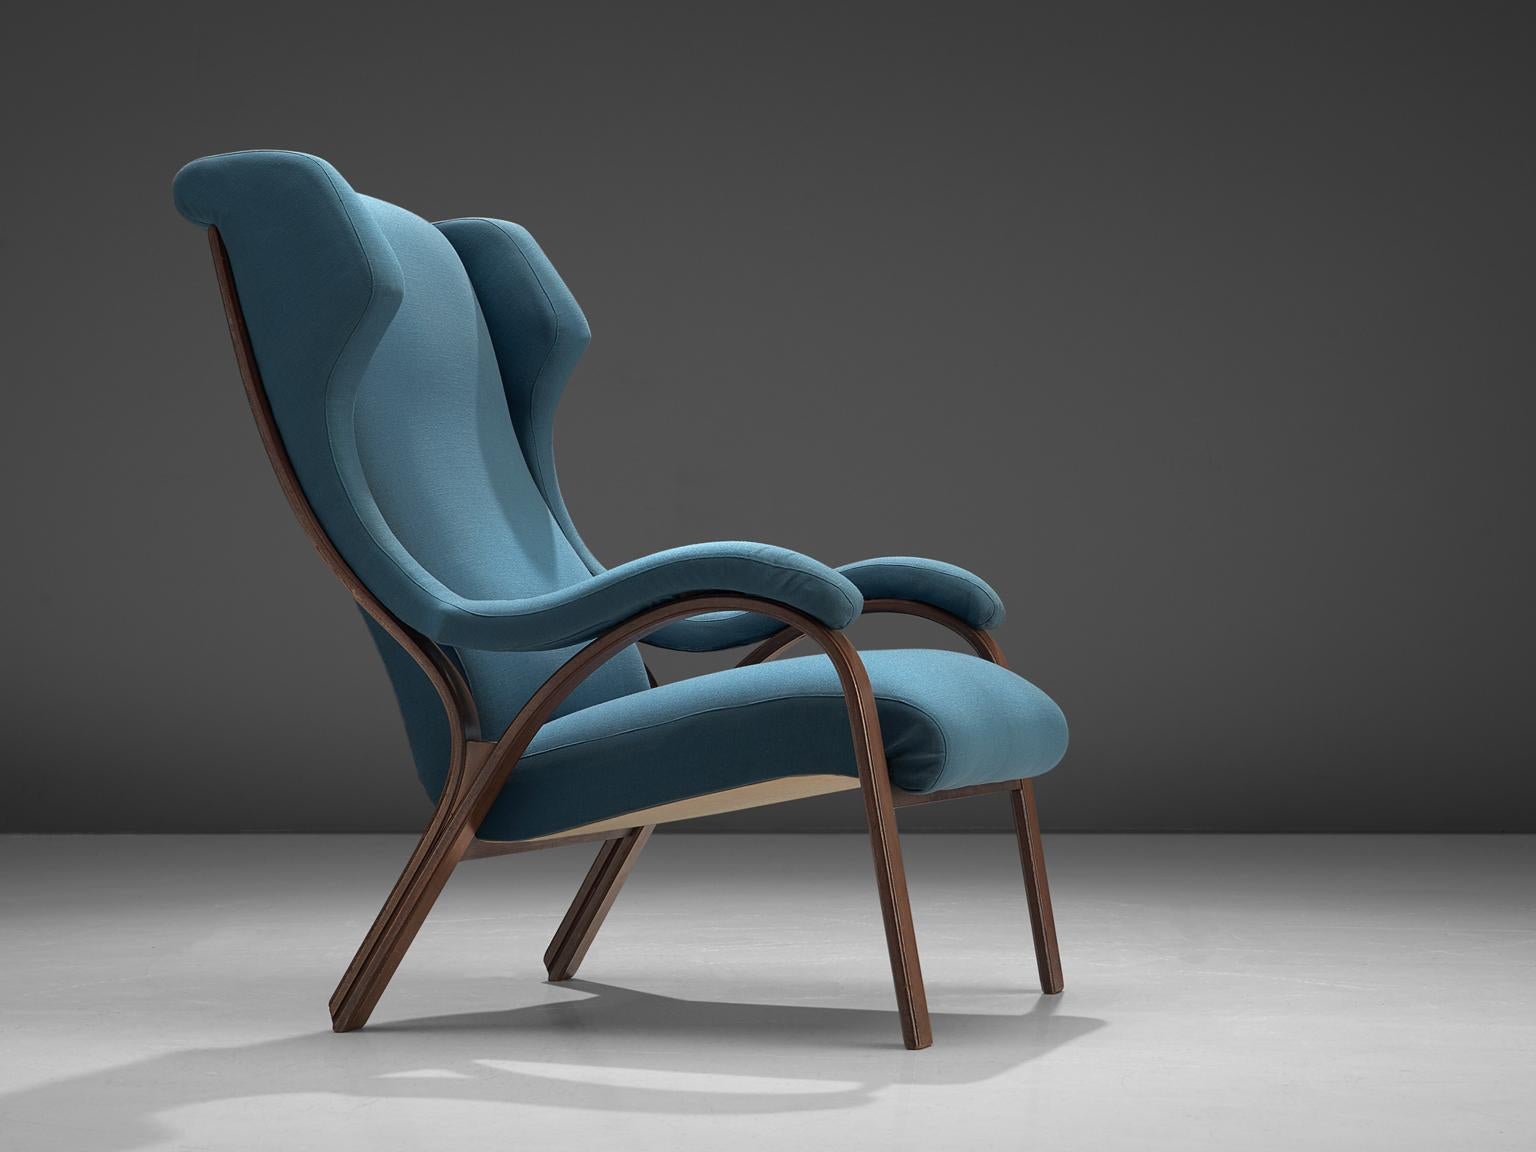 Gregotti, Meneghetti & Stoppino, 'Cavour' easy chair, walnut and blue fabric, Italy, 1959.

This Italian armchair is designed by Gregotti, Meneghetti & Stoppino. The chair features curves and gracious forms. The most interesting feature is the